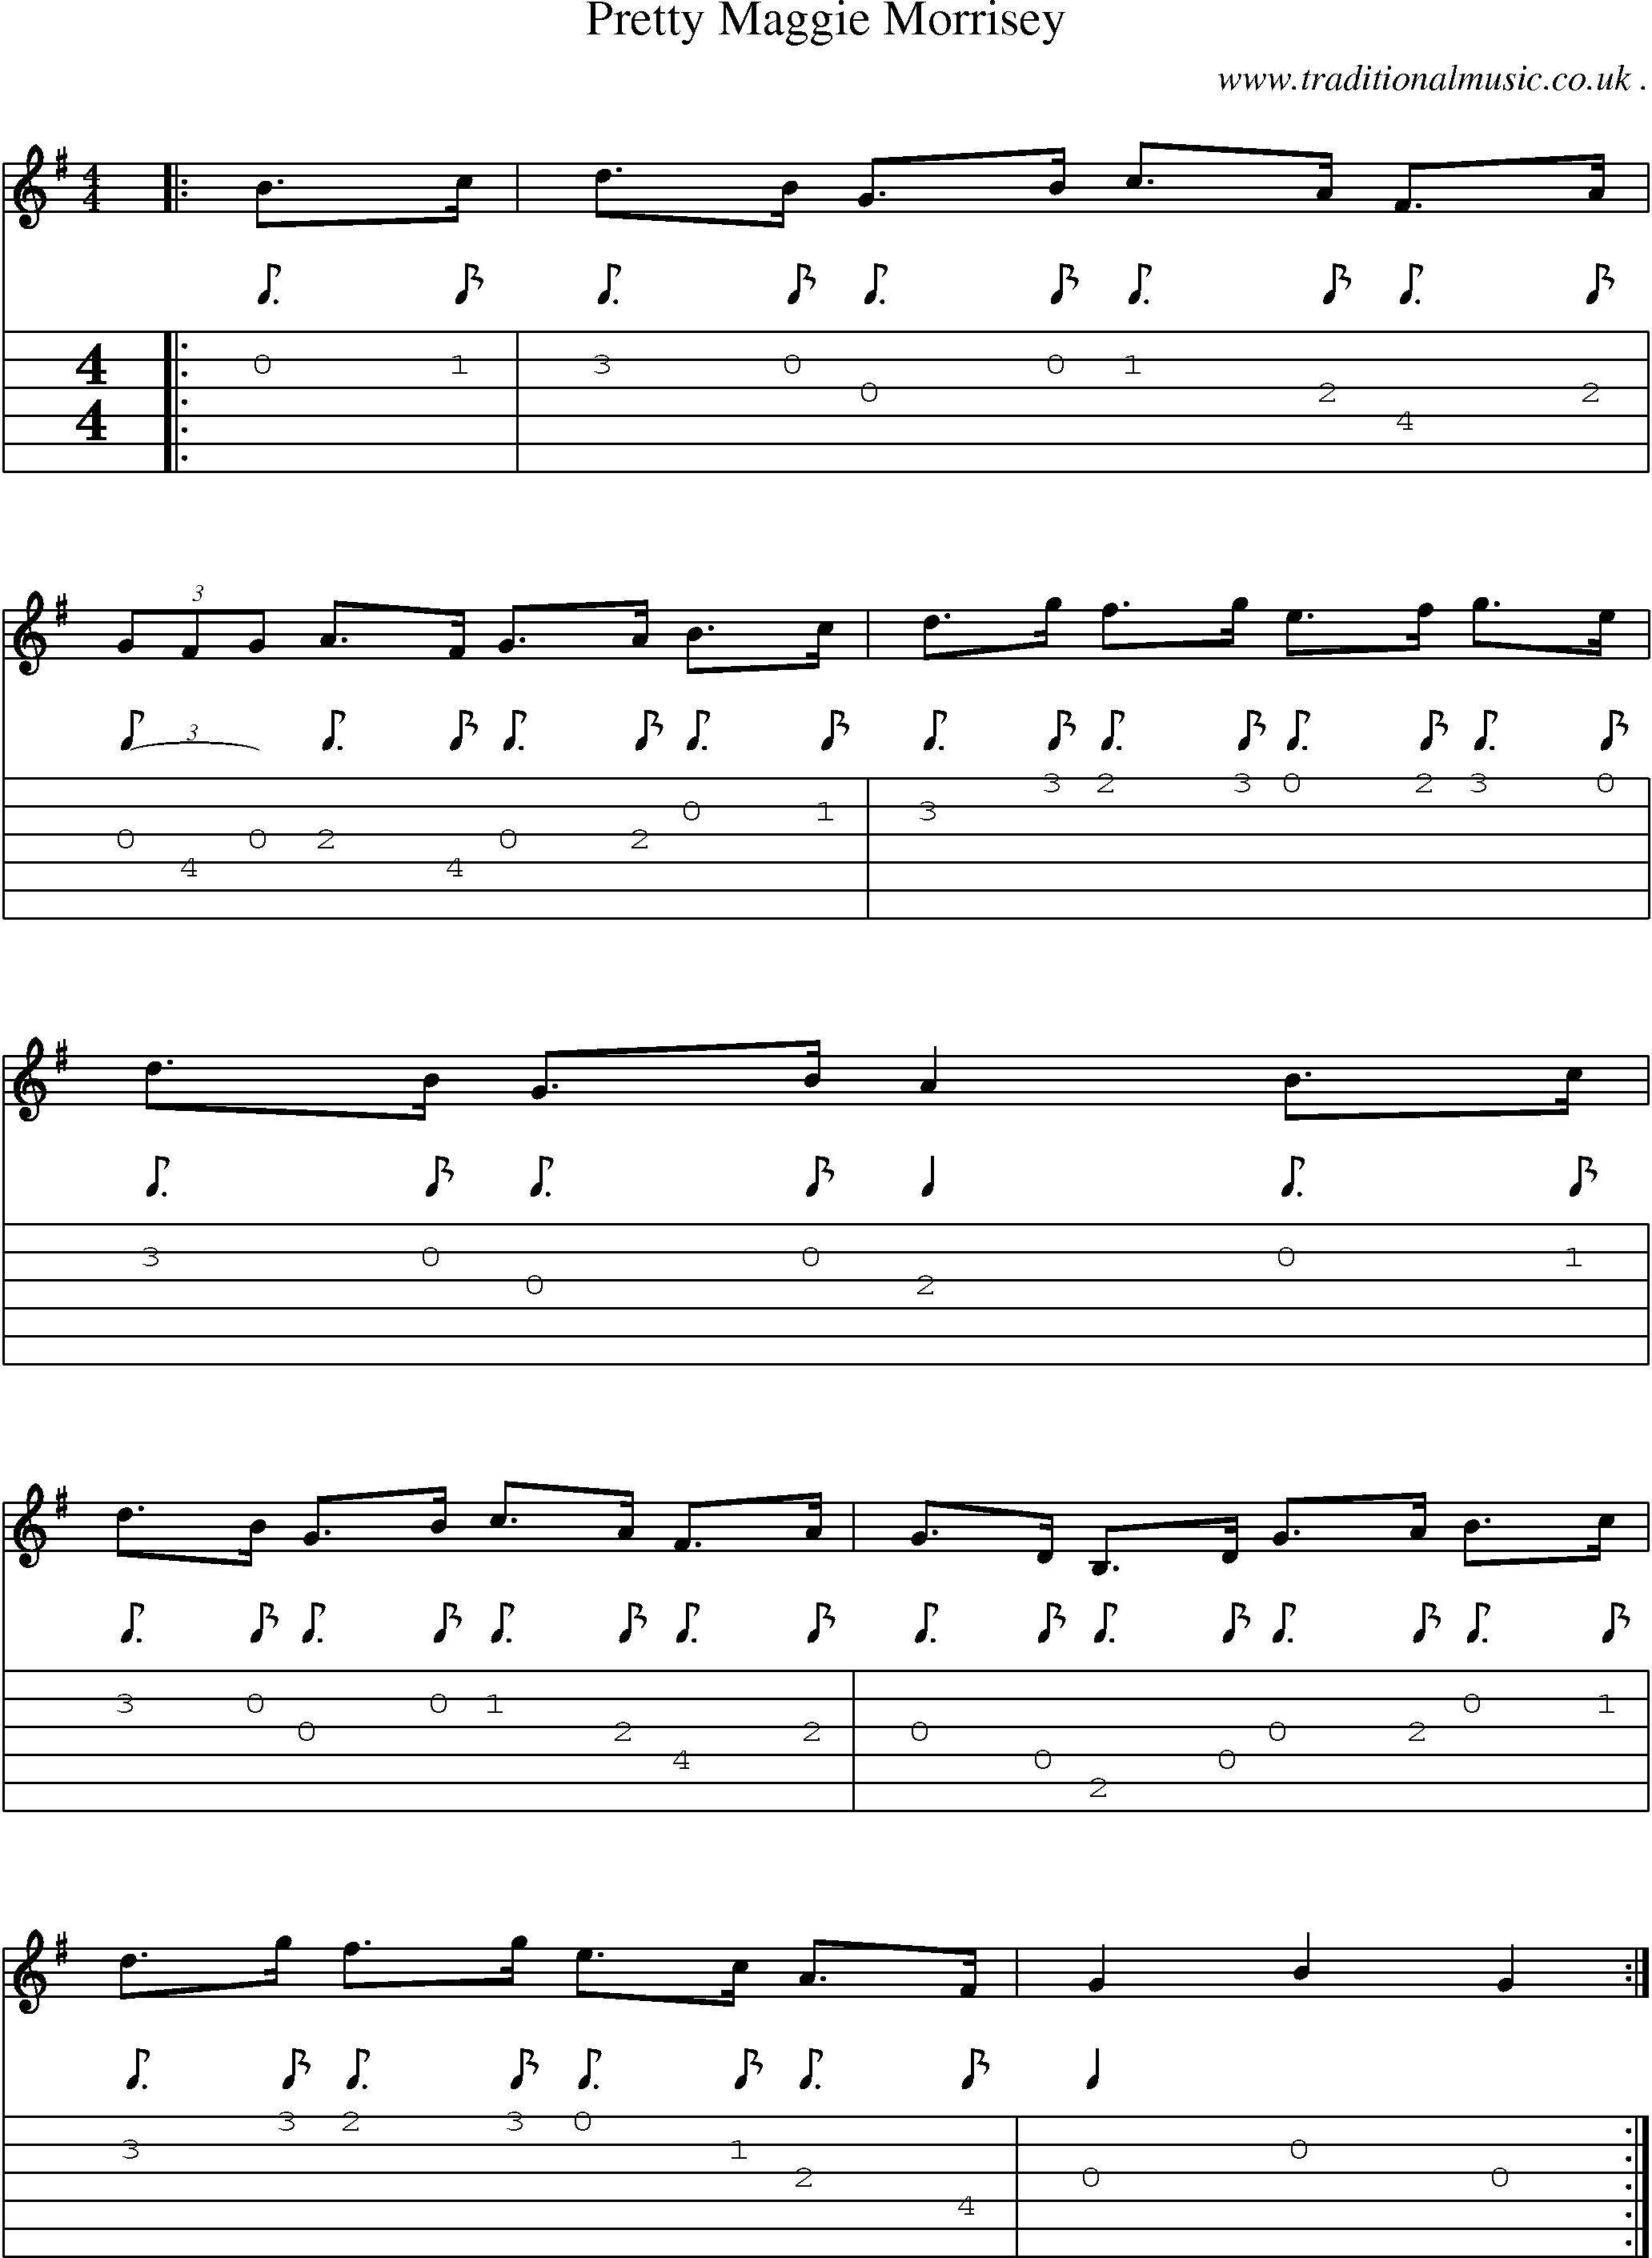 Sheet-Music and Guitar Tabs for Pretty Maggie Morrisey